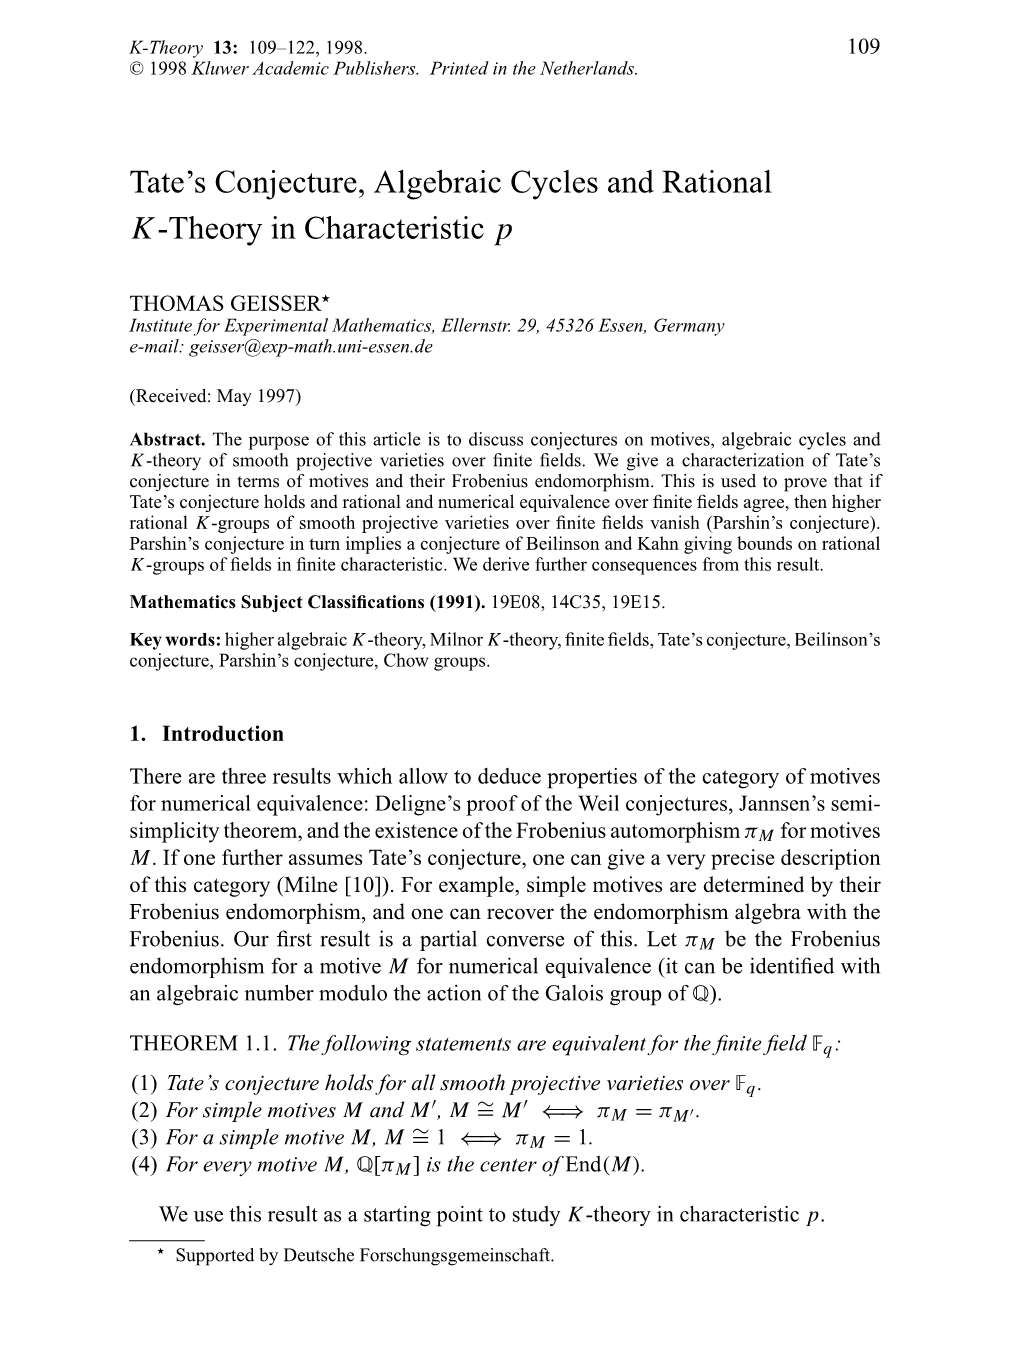 Tate's Conjecture, Algebraic Cycles and Rational K-Theory In